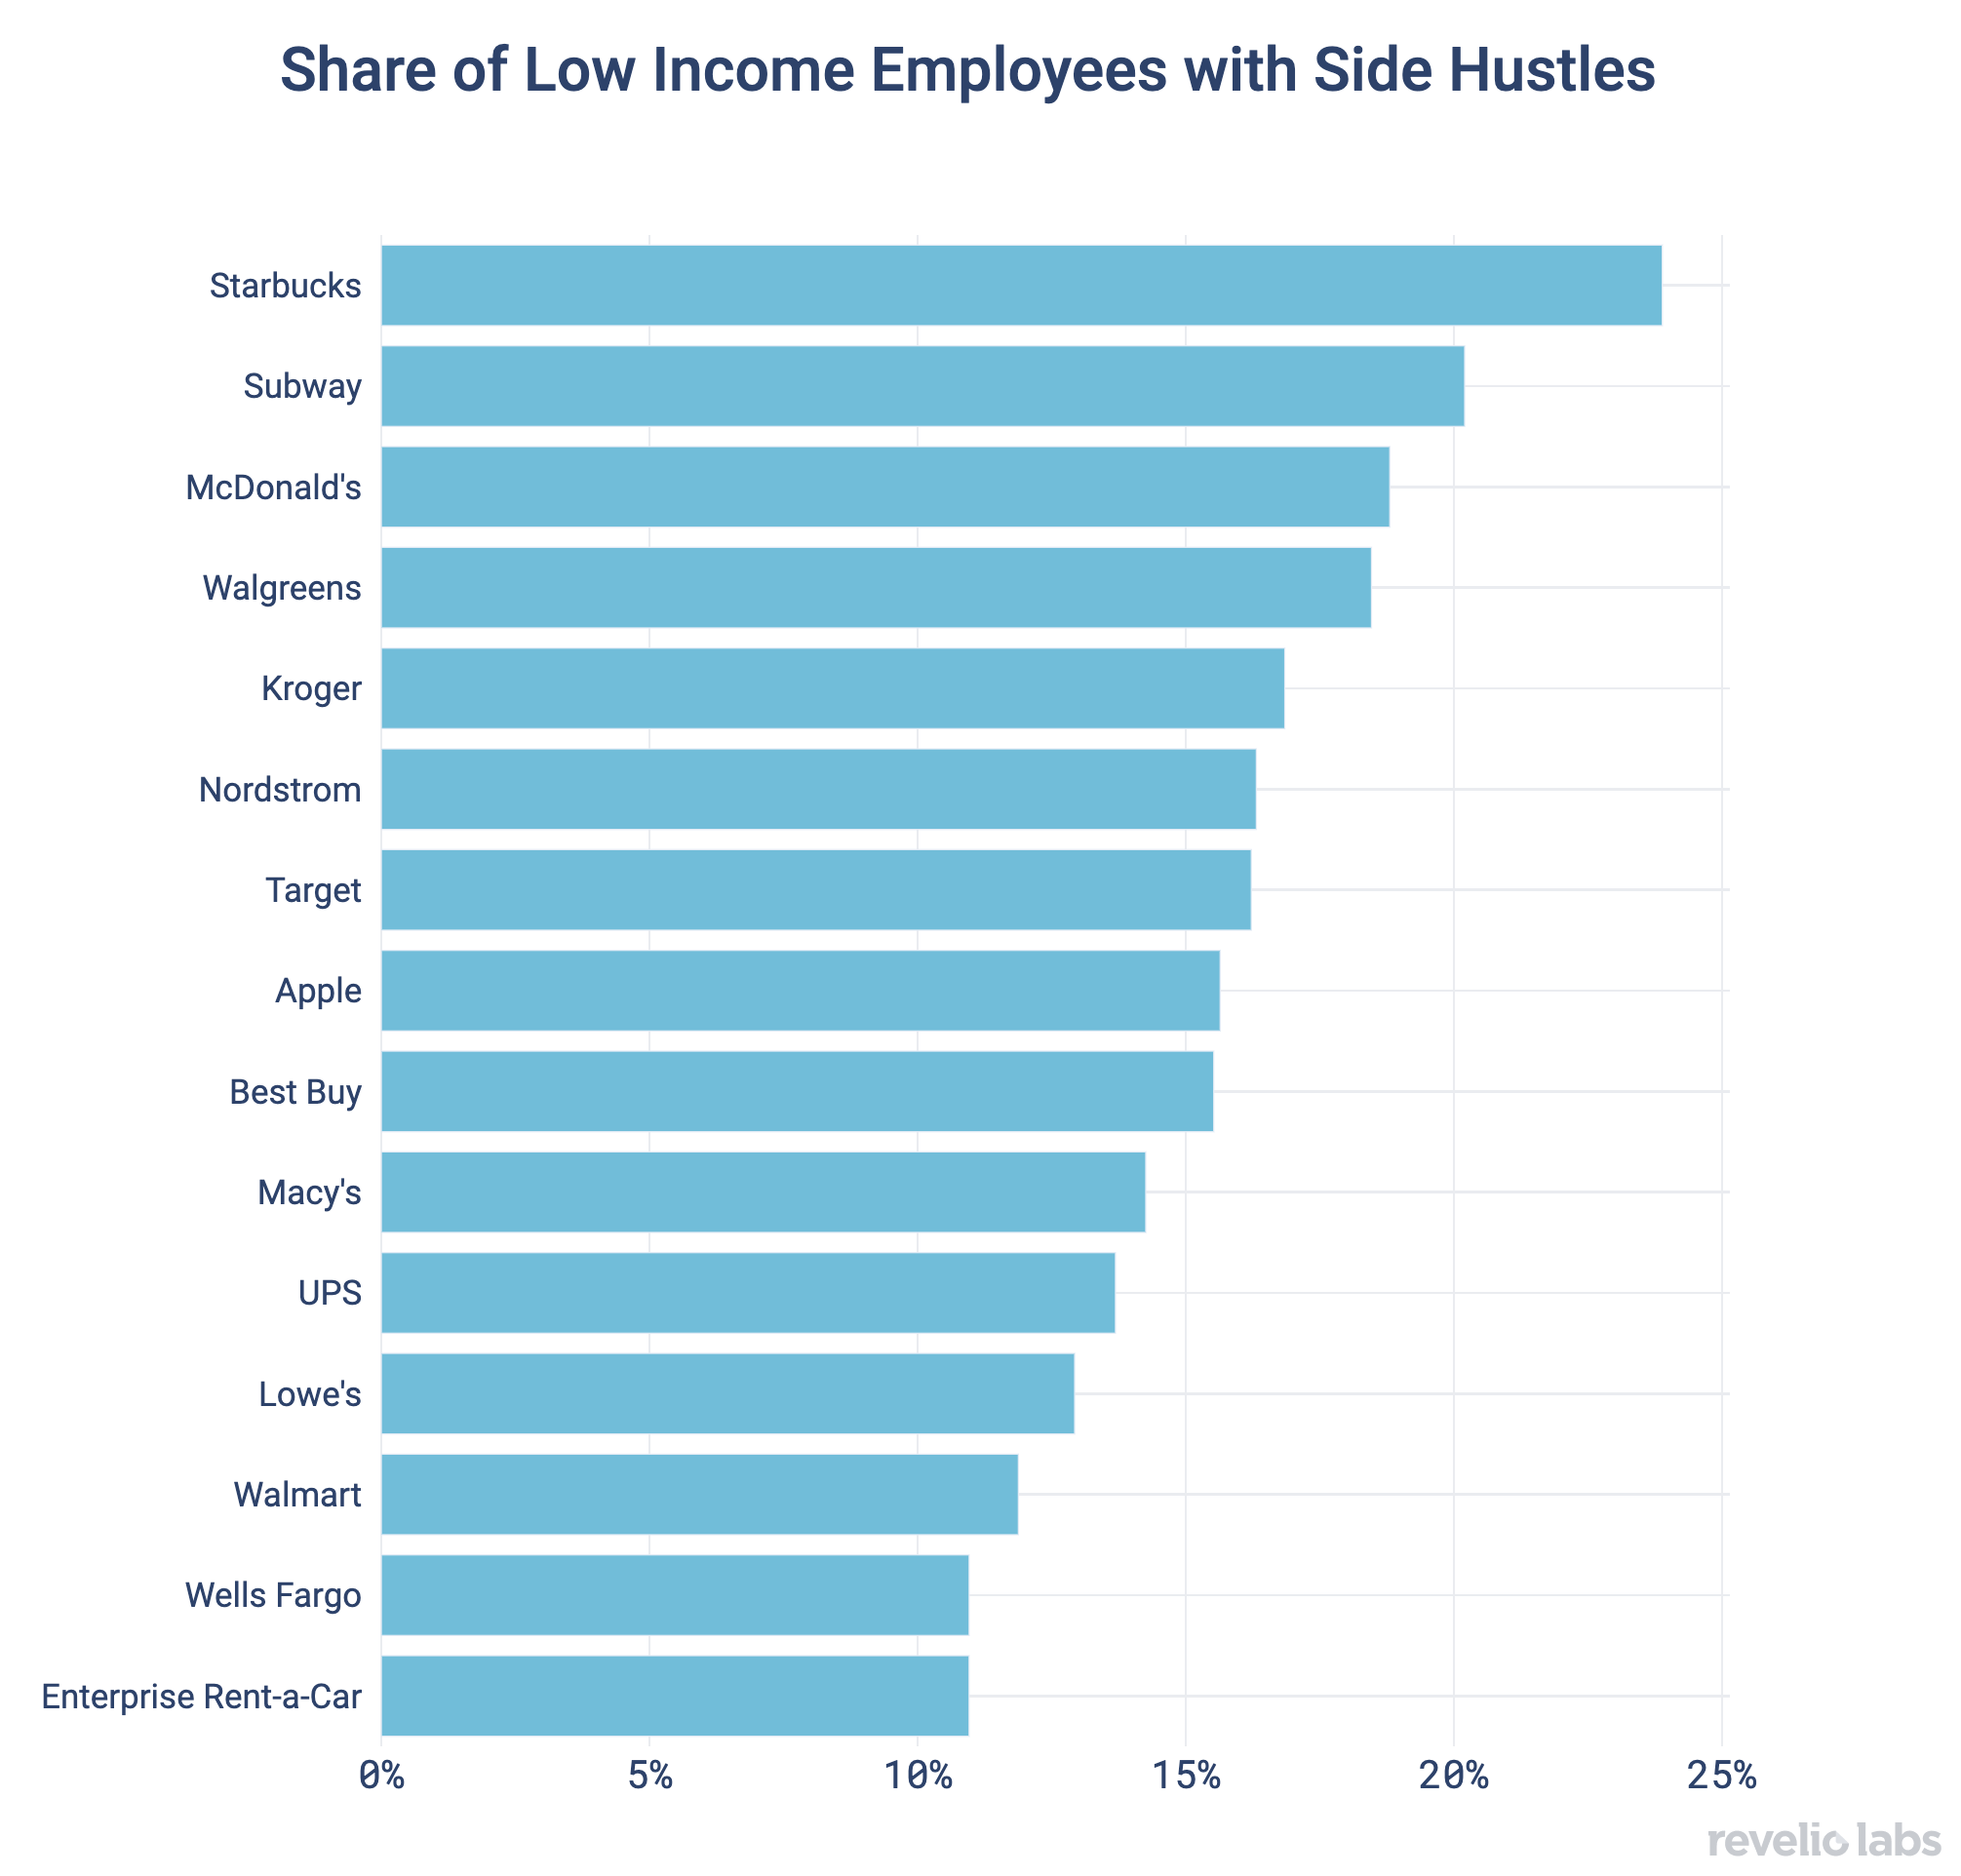 Share of Low Income Employees with Side Hustles